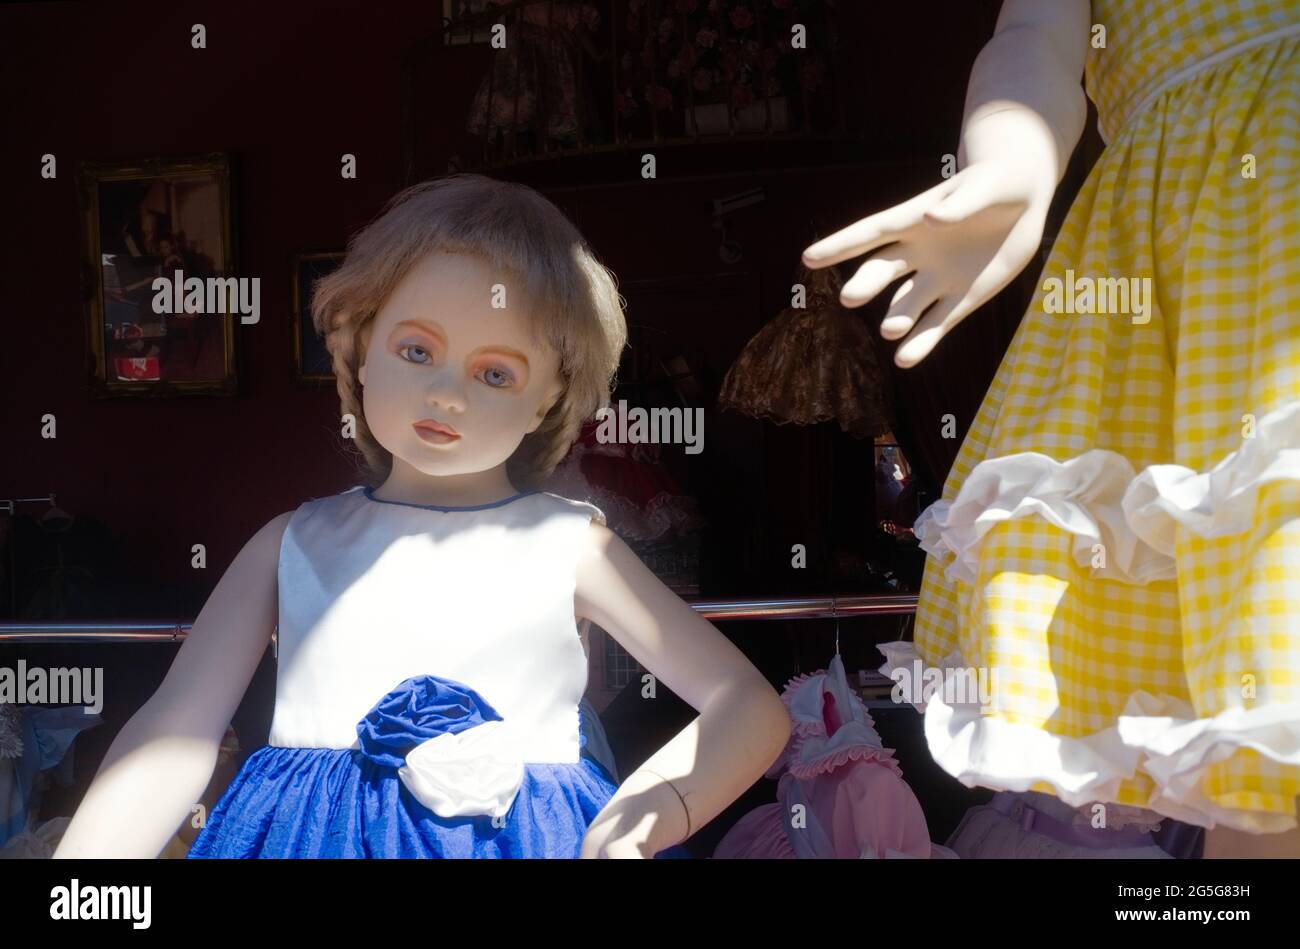 Spooky child mannakin in a ballet clothing shop Stock Photo